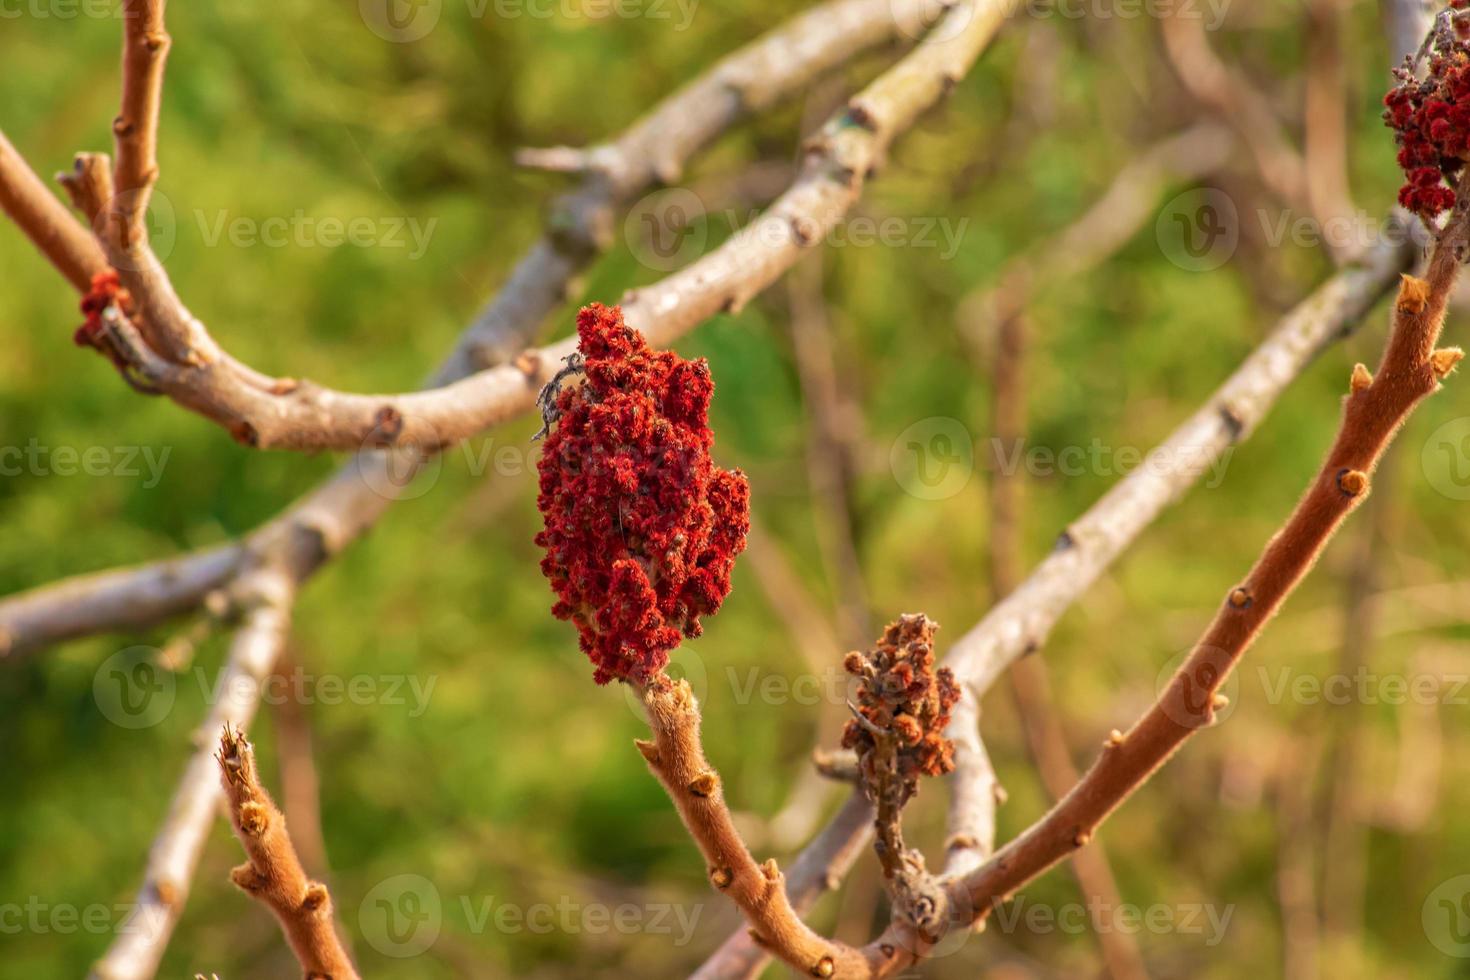 Branches with buds of staghorn sumac in early spring in the garden. photo